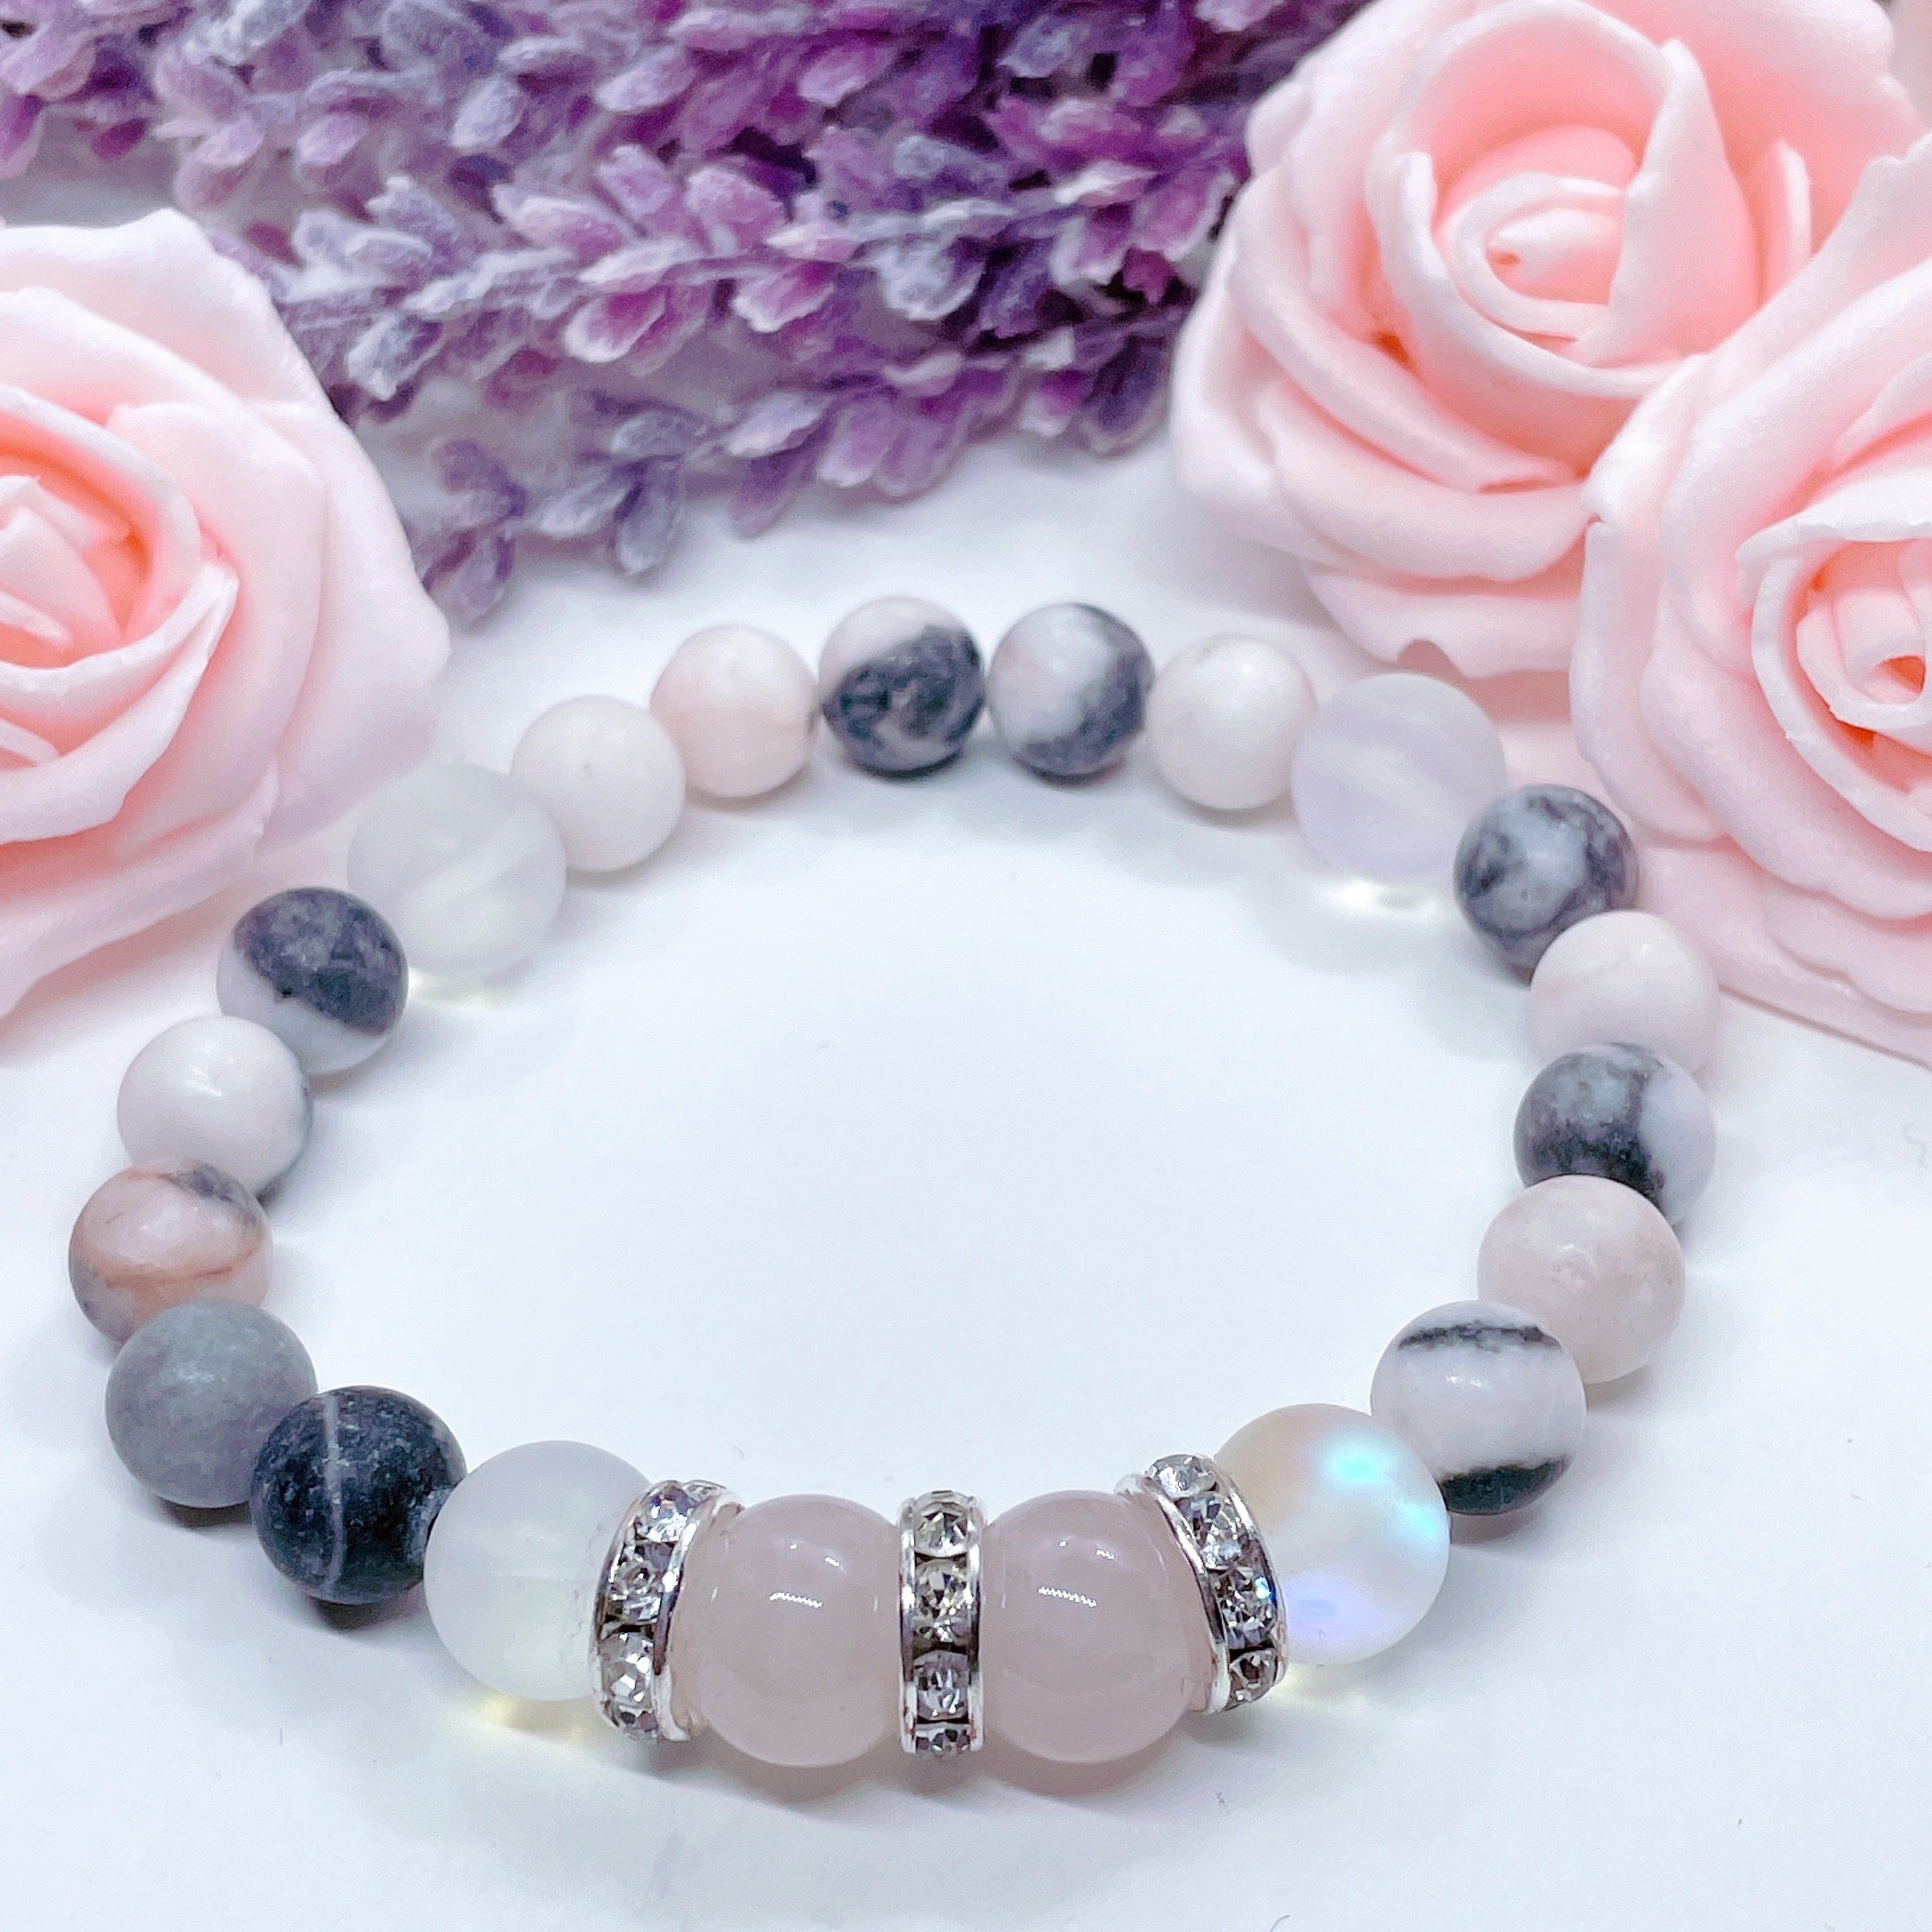 A Rose Quartz Rhinestone and Gemstone stretch bracelet made with 2  pink rose quartz gemstones, translucent aura beads, pink jasper gemstones, and rhinestone accents for added sparkle sits on a white table. 